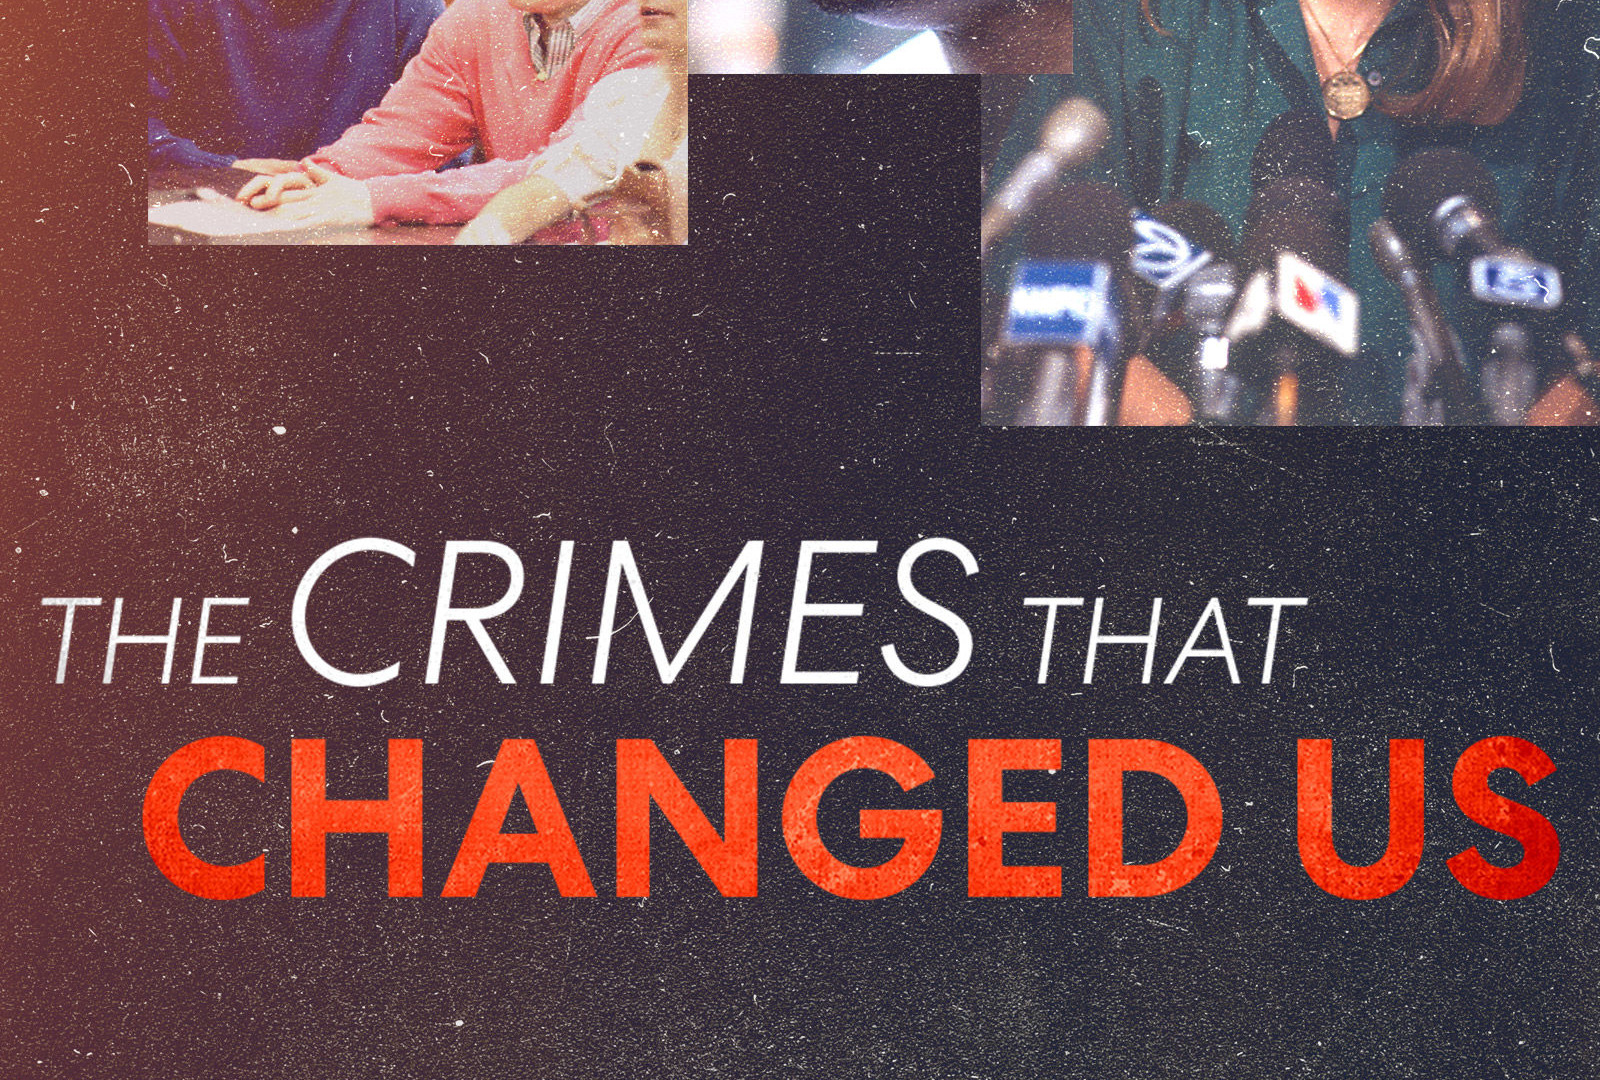 Show The Crimes That Changed Us